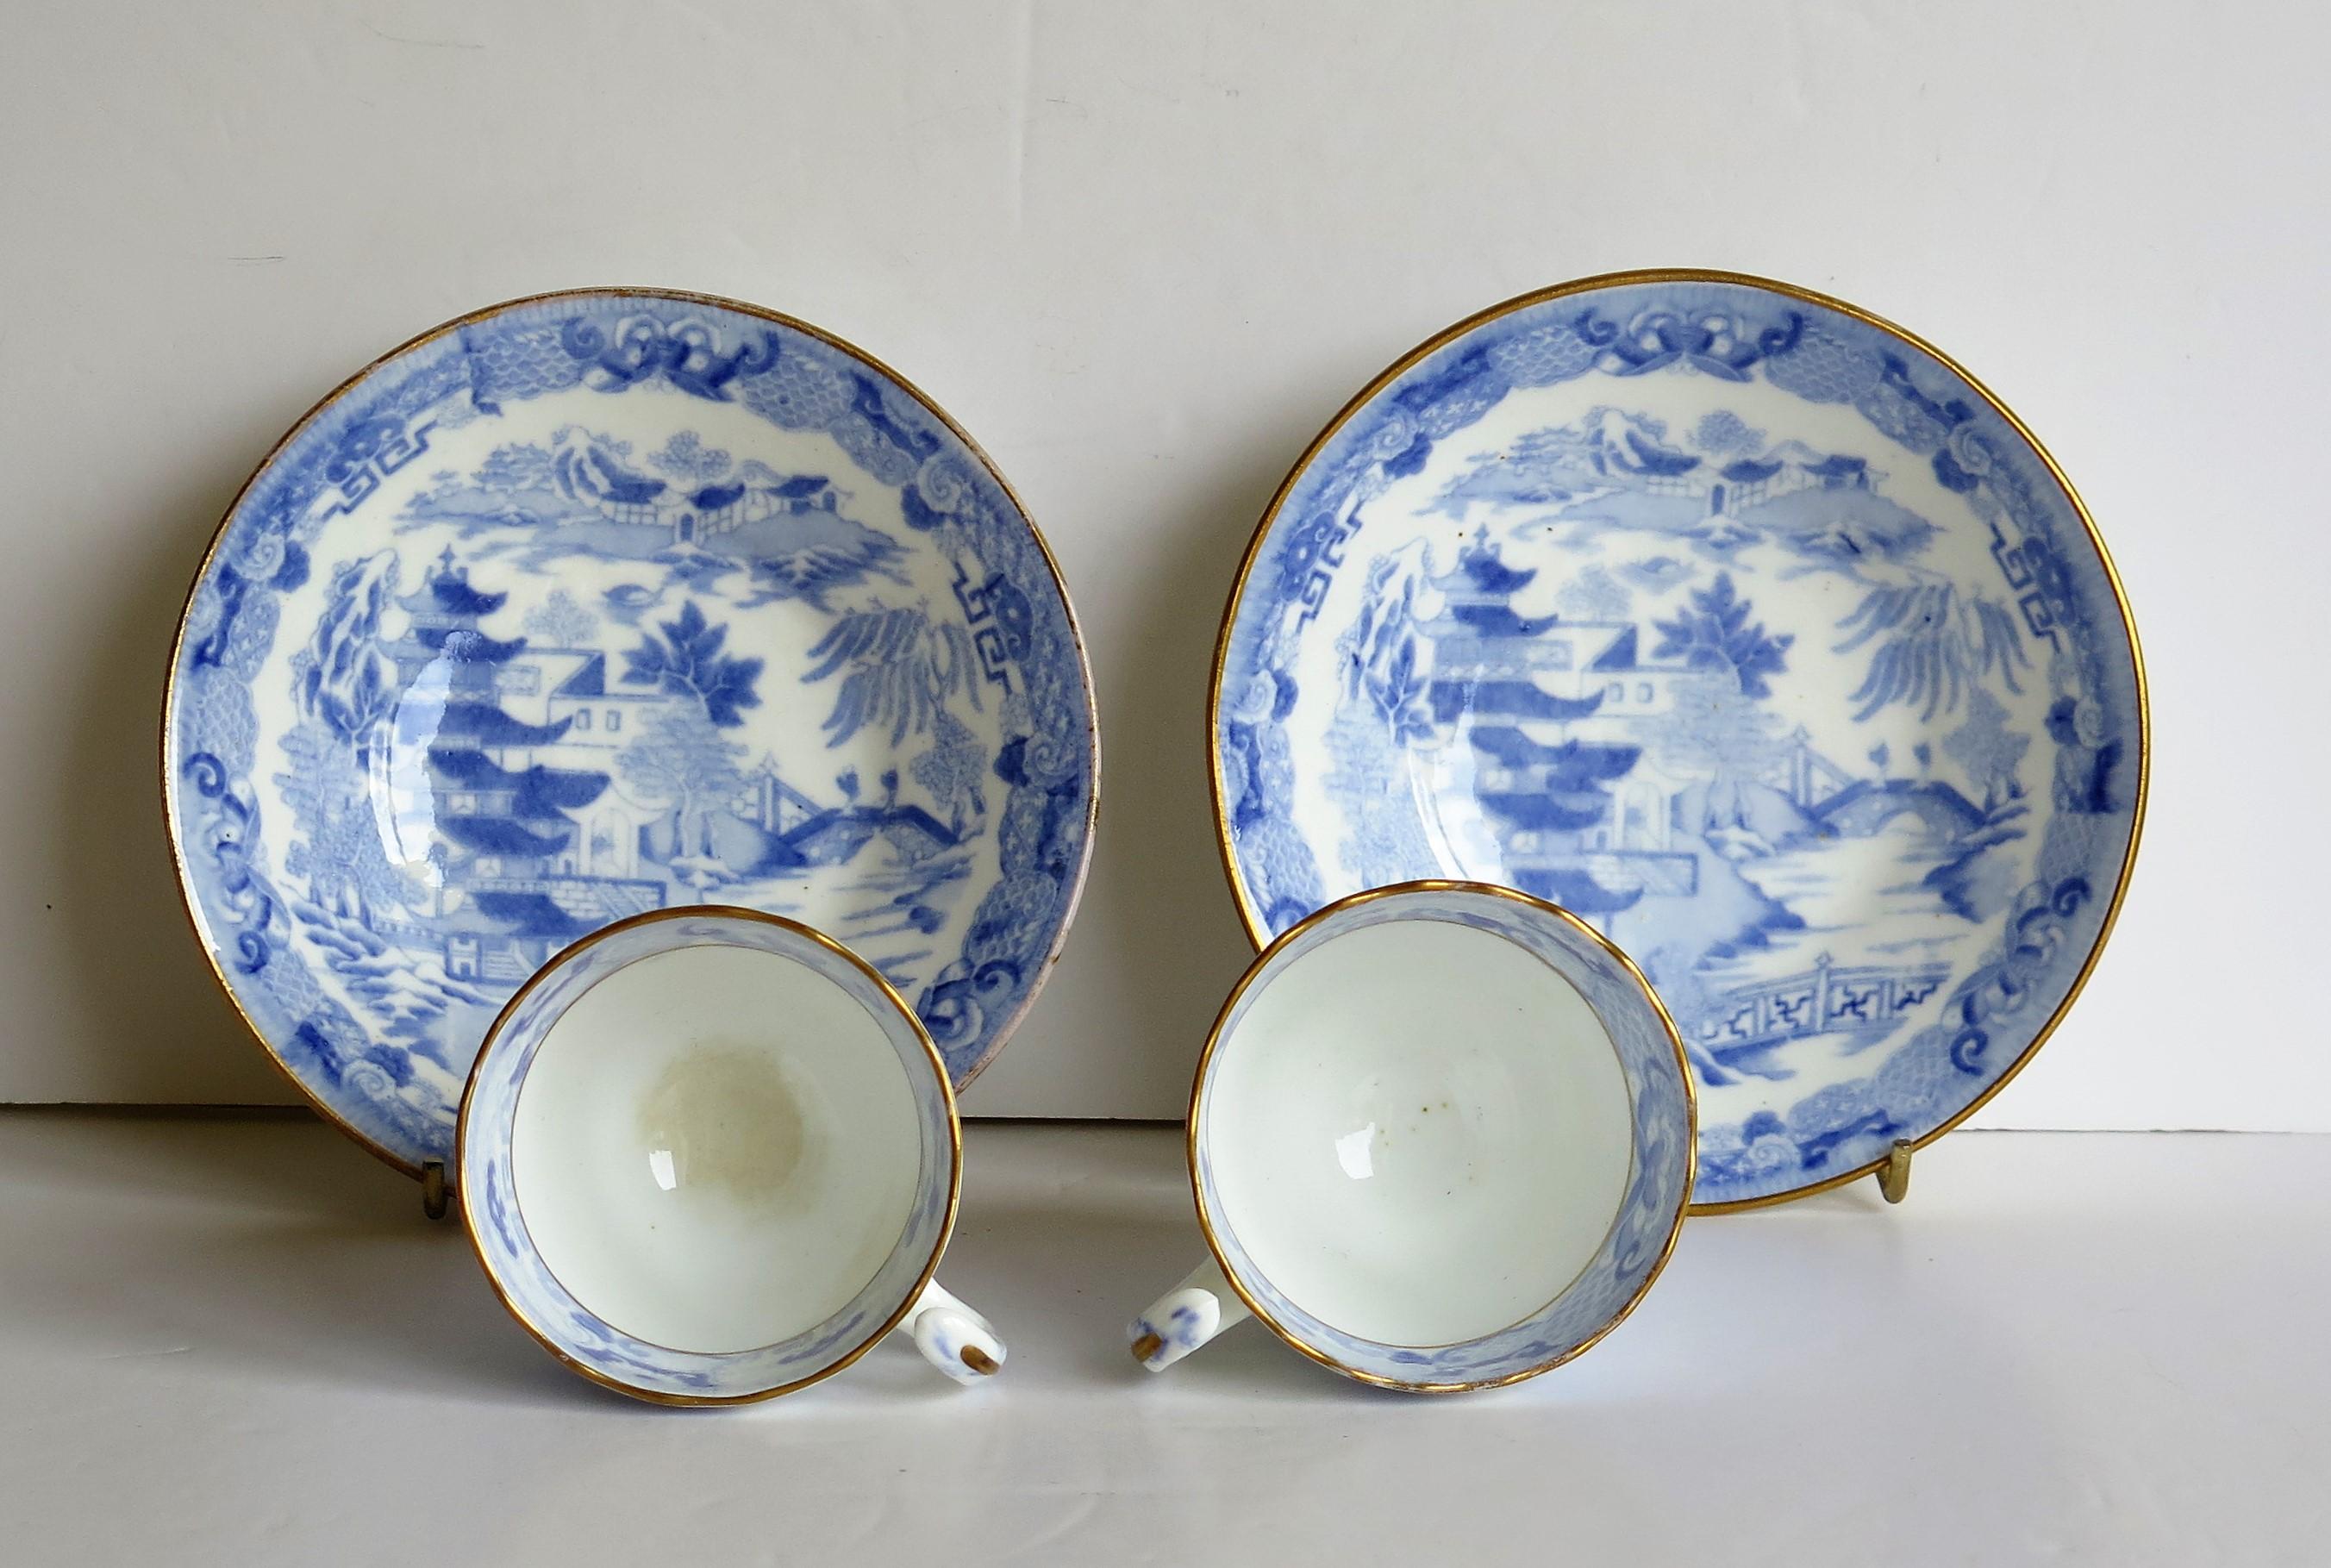 Glazed Miles Mason Porcelain Pair of Cups & Saucers Blue Broseley Willow Ptn circa 1815